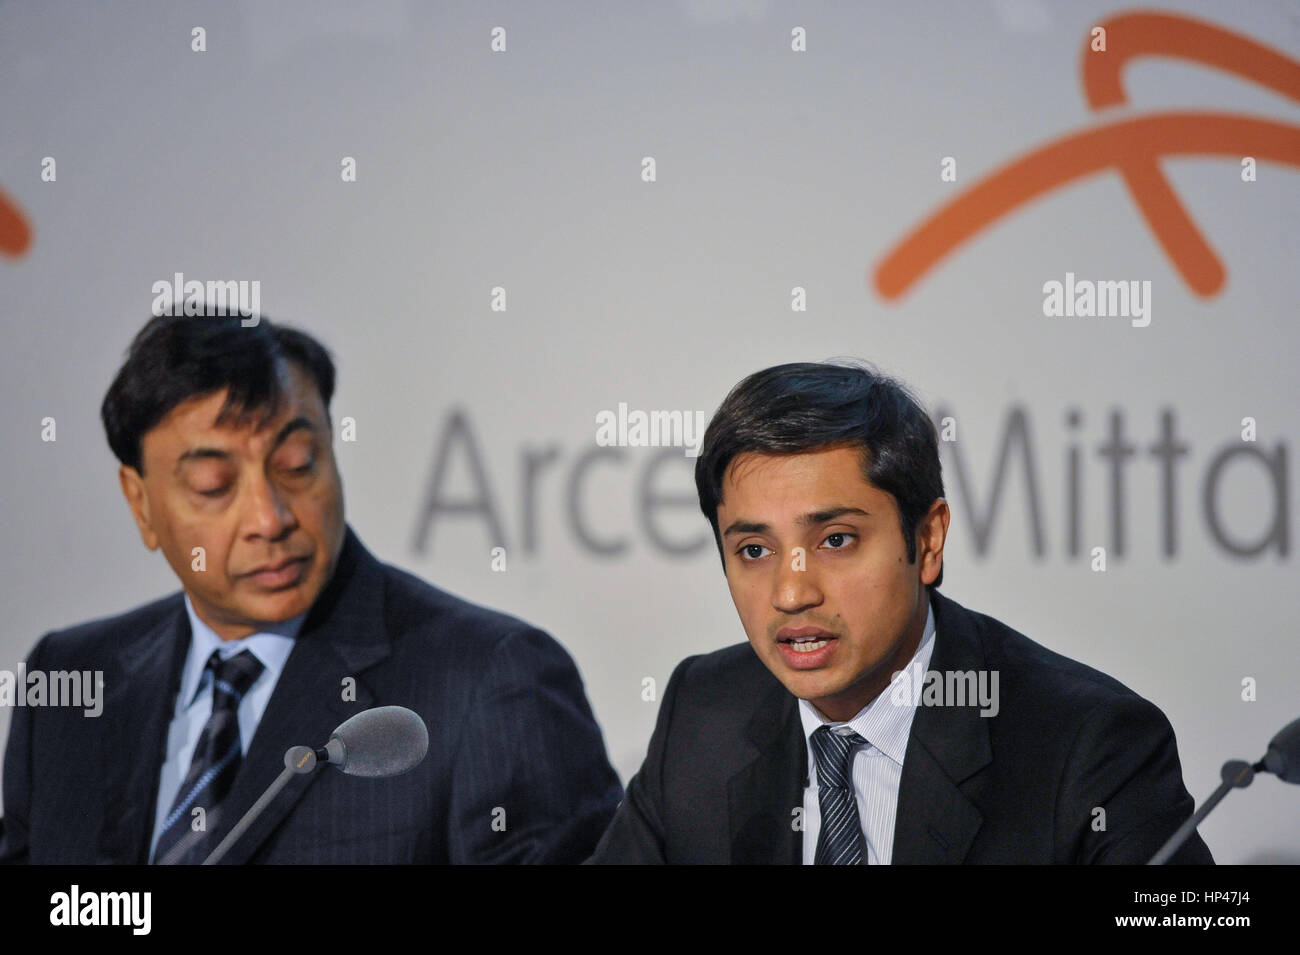 250 Aditya mittal Stock Pictures, Editorial Images and Stock